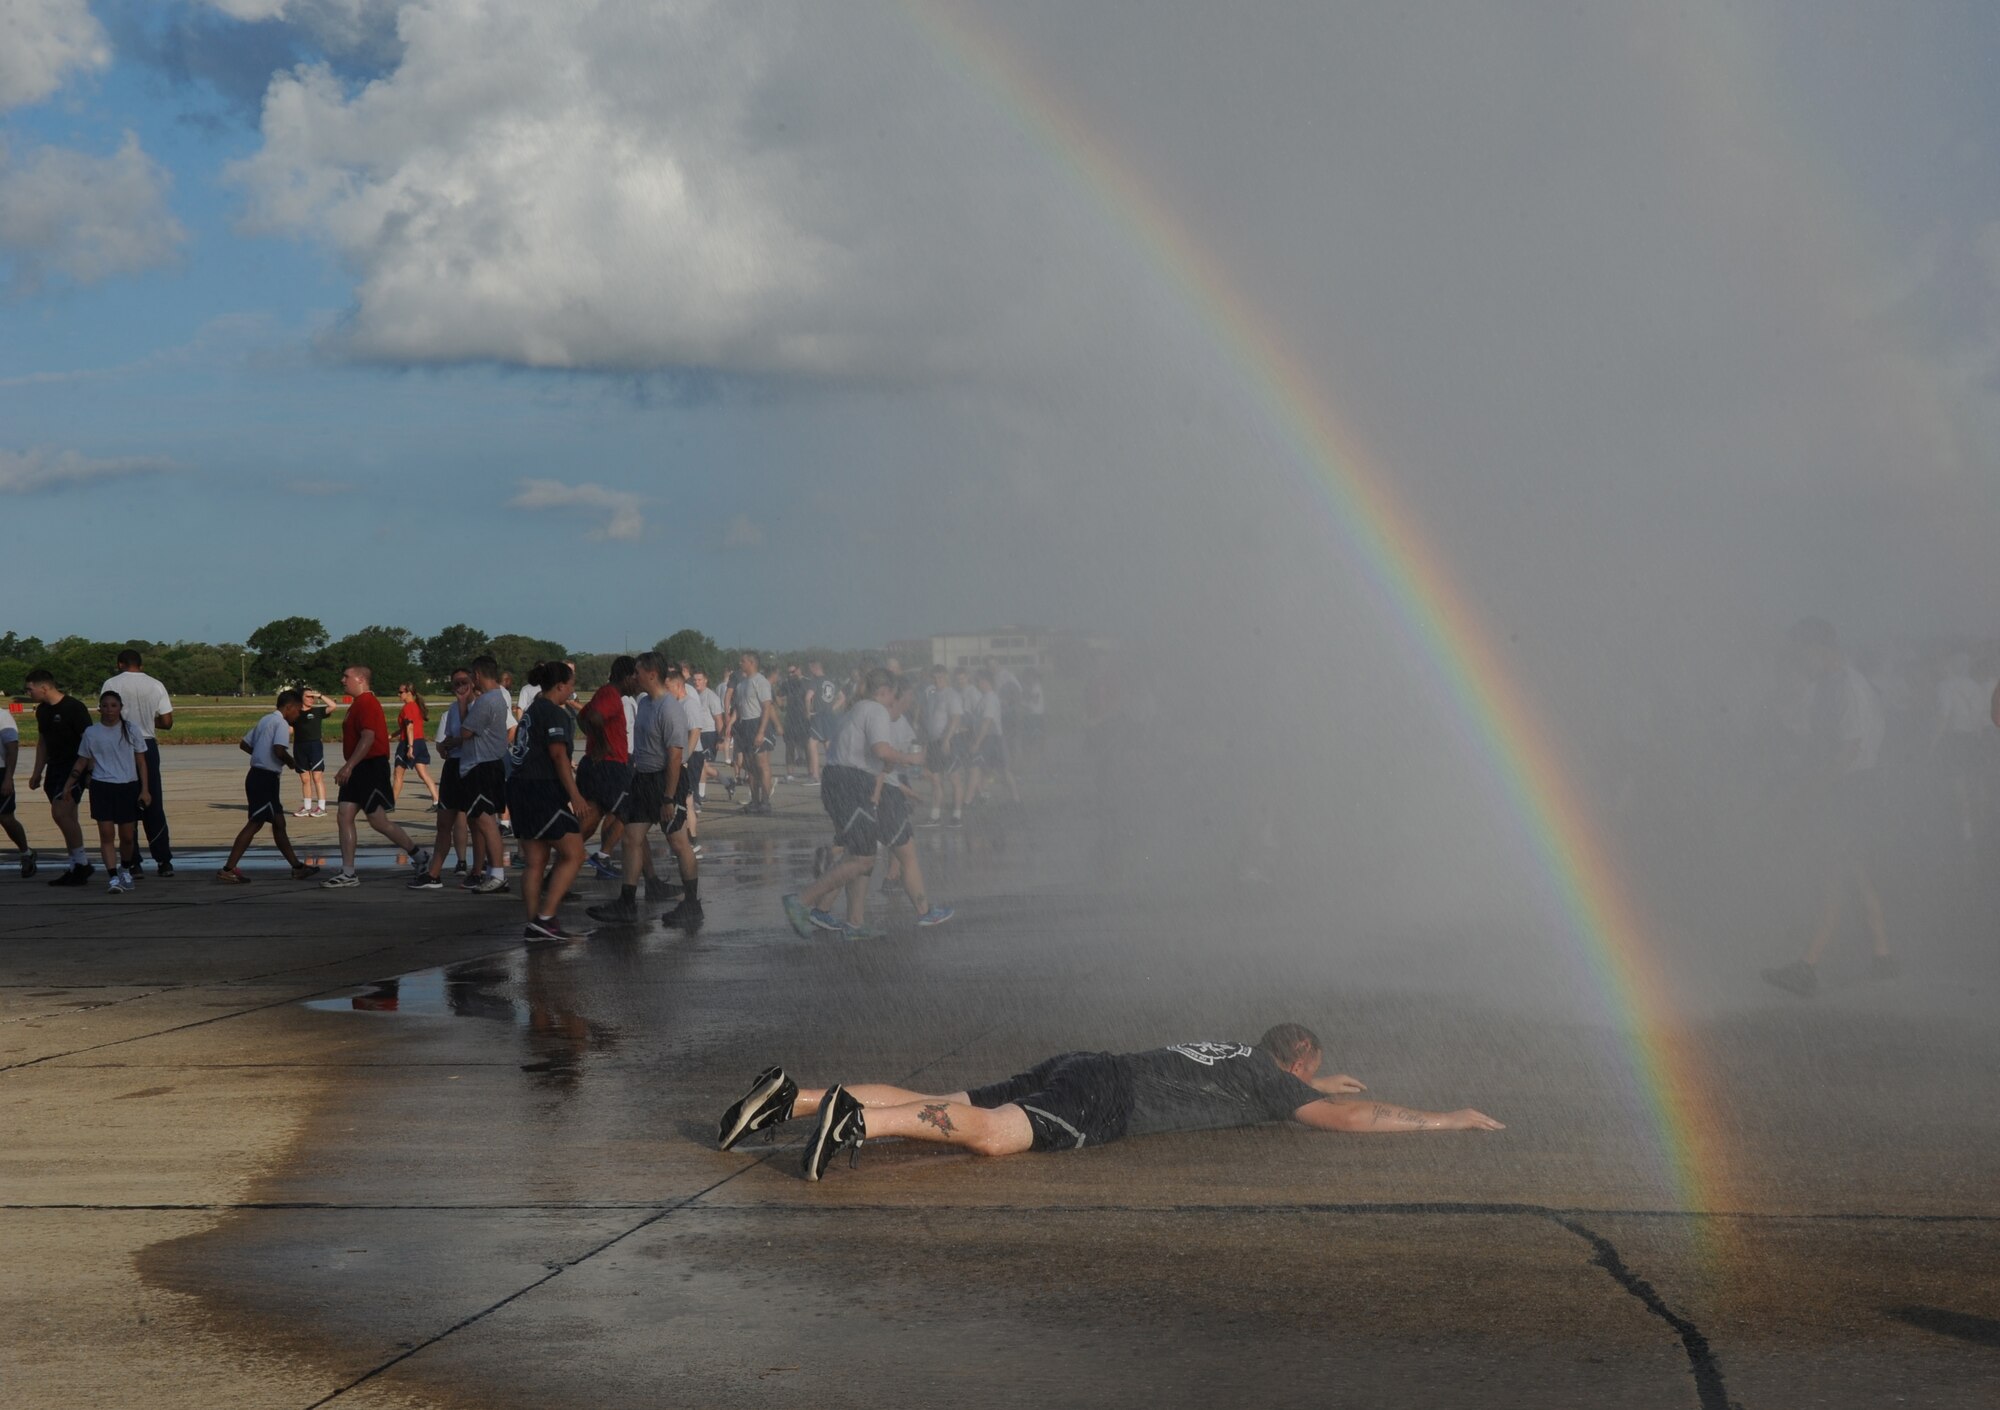 Staff Sgt. Jared Miller, 81st Security Forces Squadron combat arms instructor, relaxes below the mist and rainbow courtesy of the Keesler Fire Department following a 5K flightline run April 25, 2016, Keesler Air Force Base, Miss. The run was the kickoff event for a week full of activities supporting Wingman Week. (U.S. Air Force photo by Kemberly Groue)